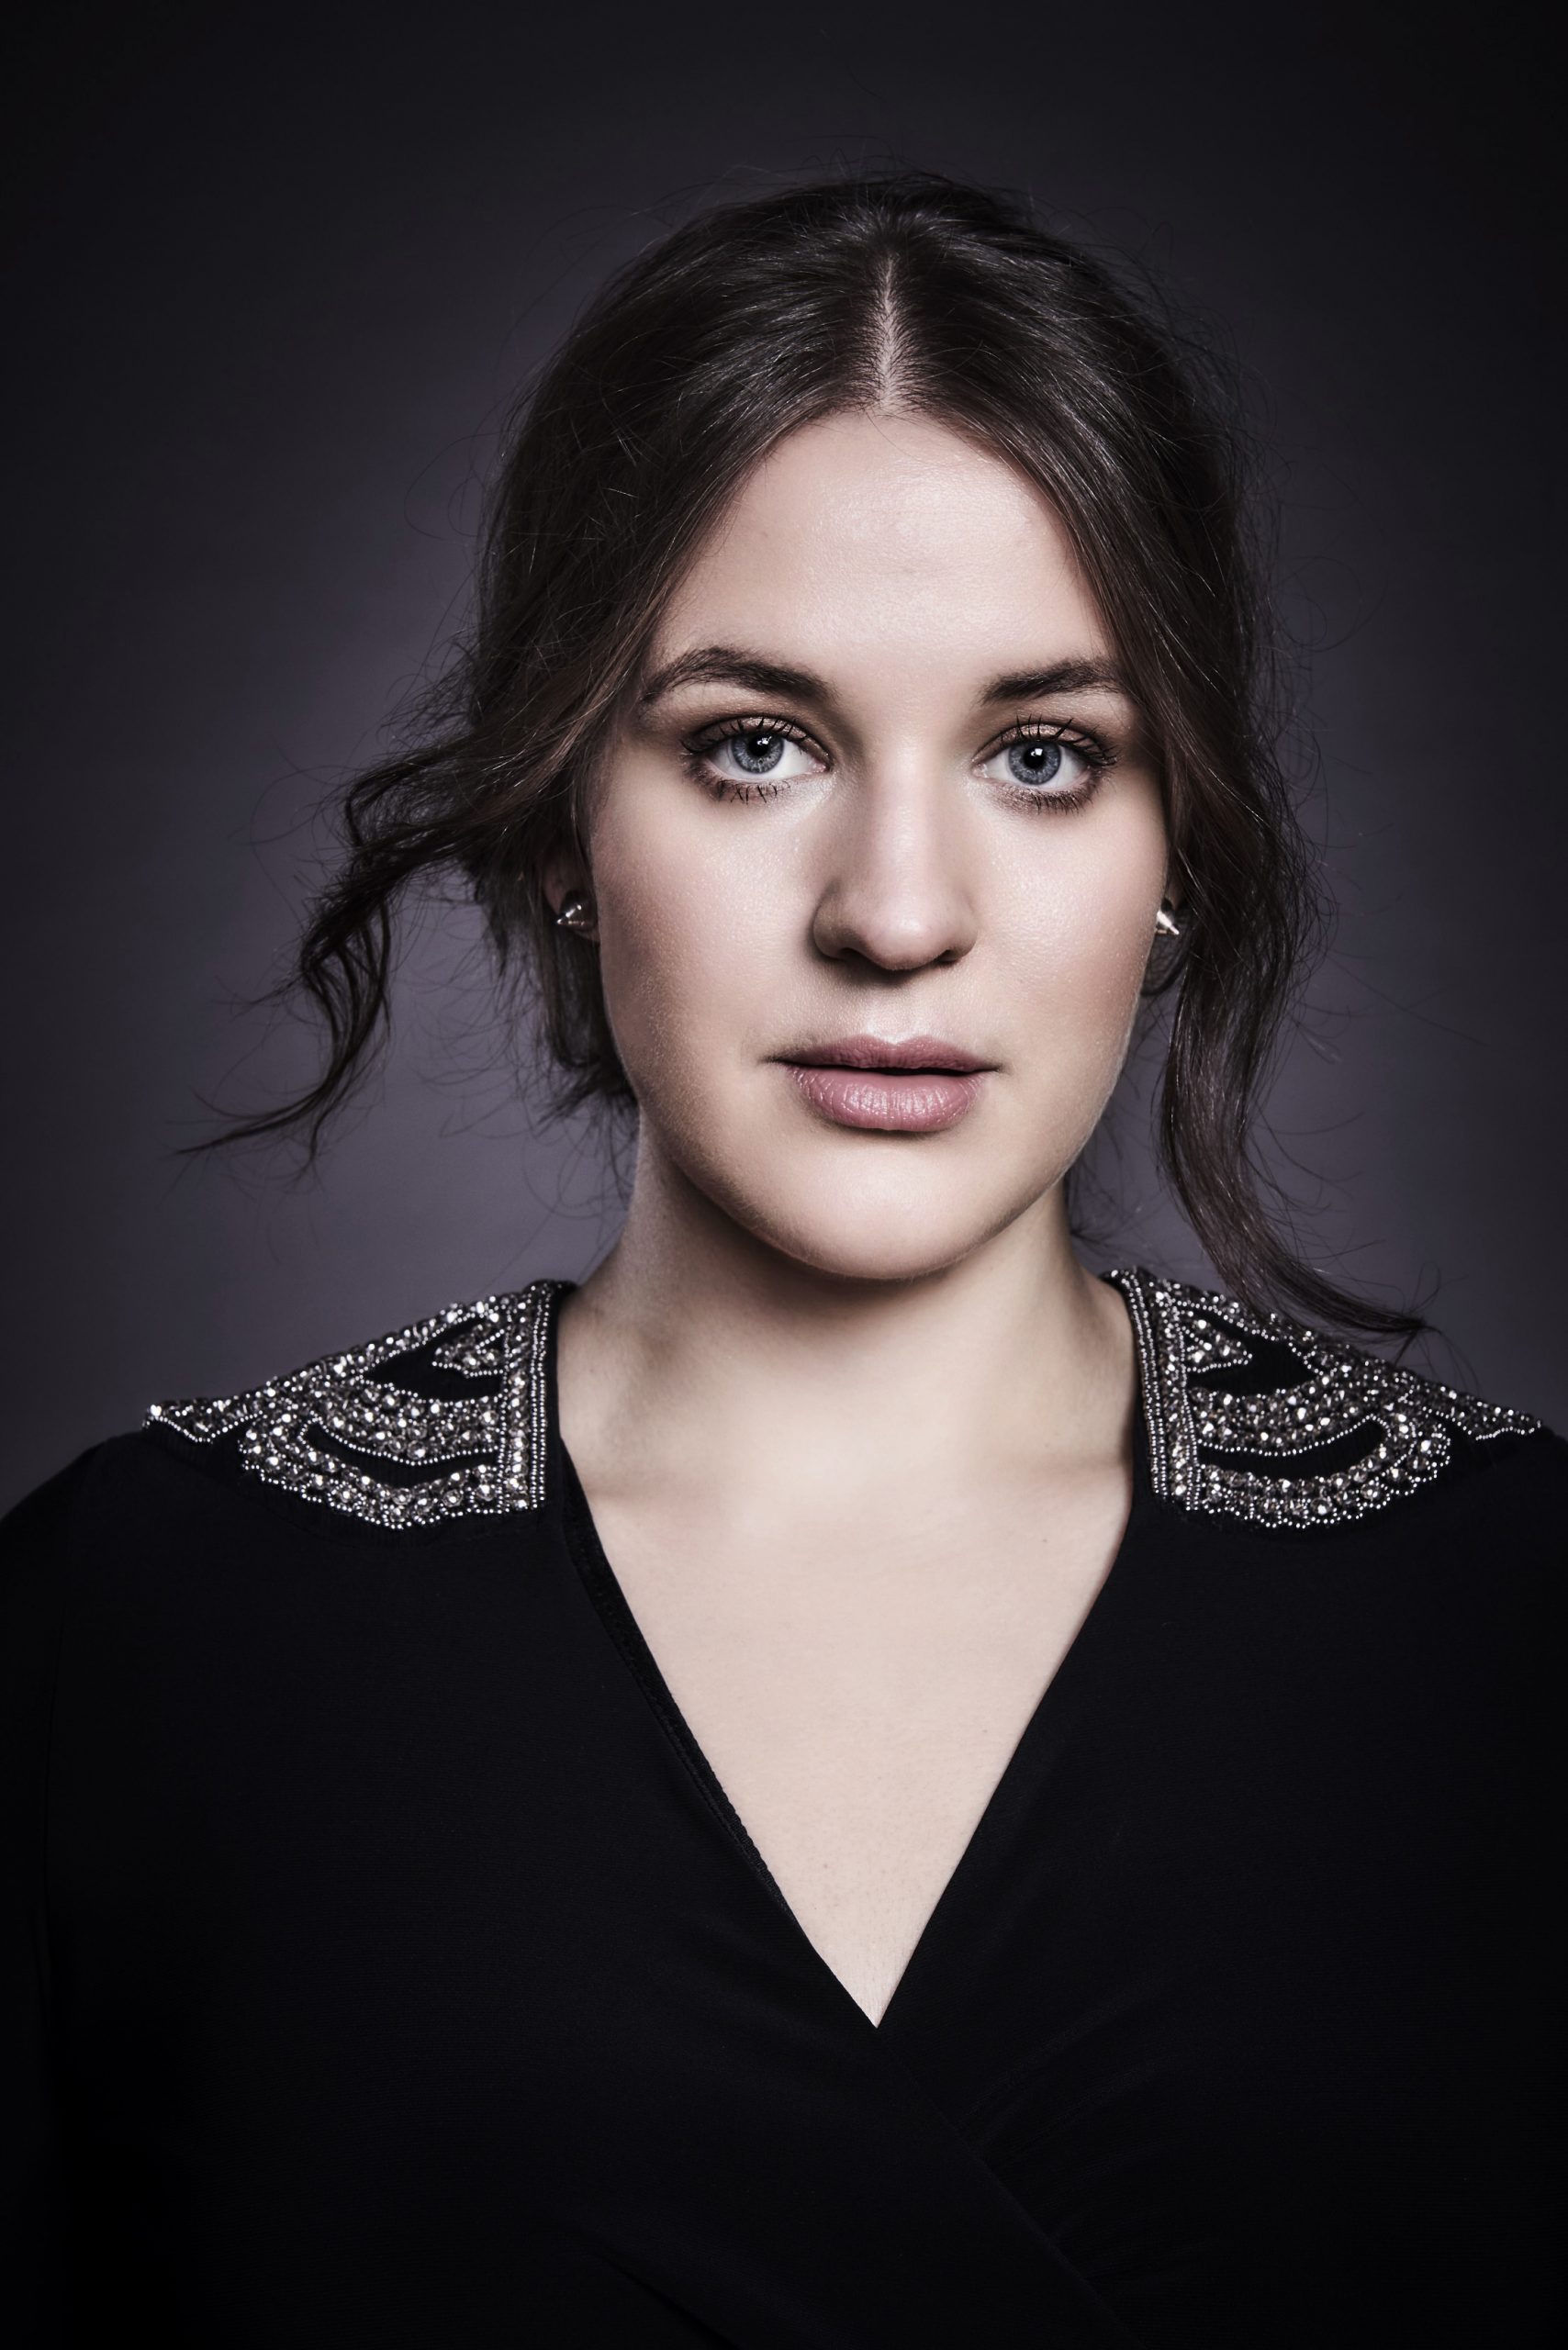 Lise sings Strauss Opus 27 songs with the Oslo Philharmonic Orchestra